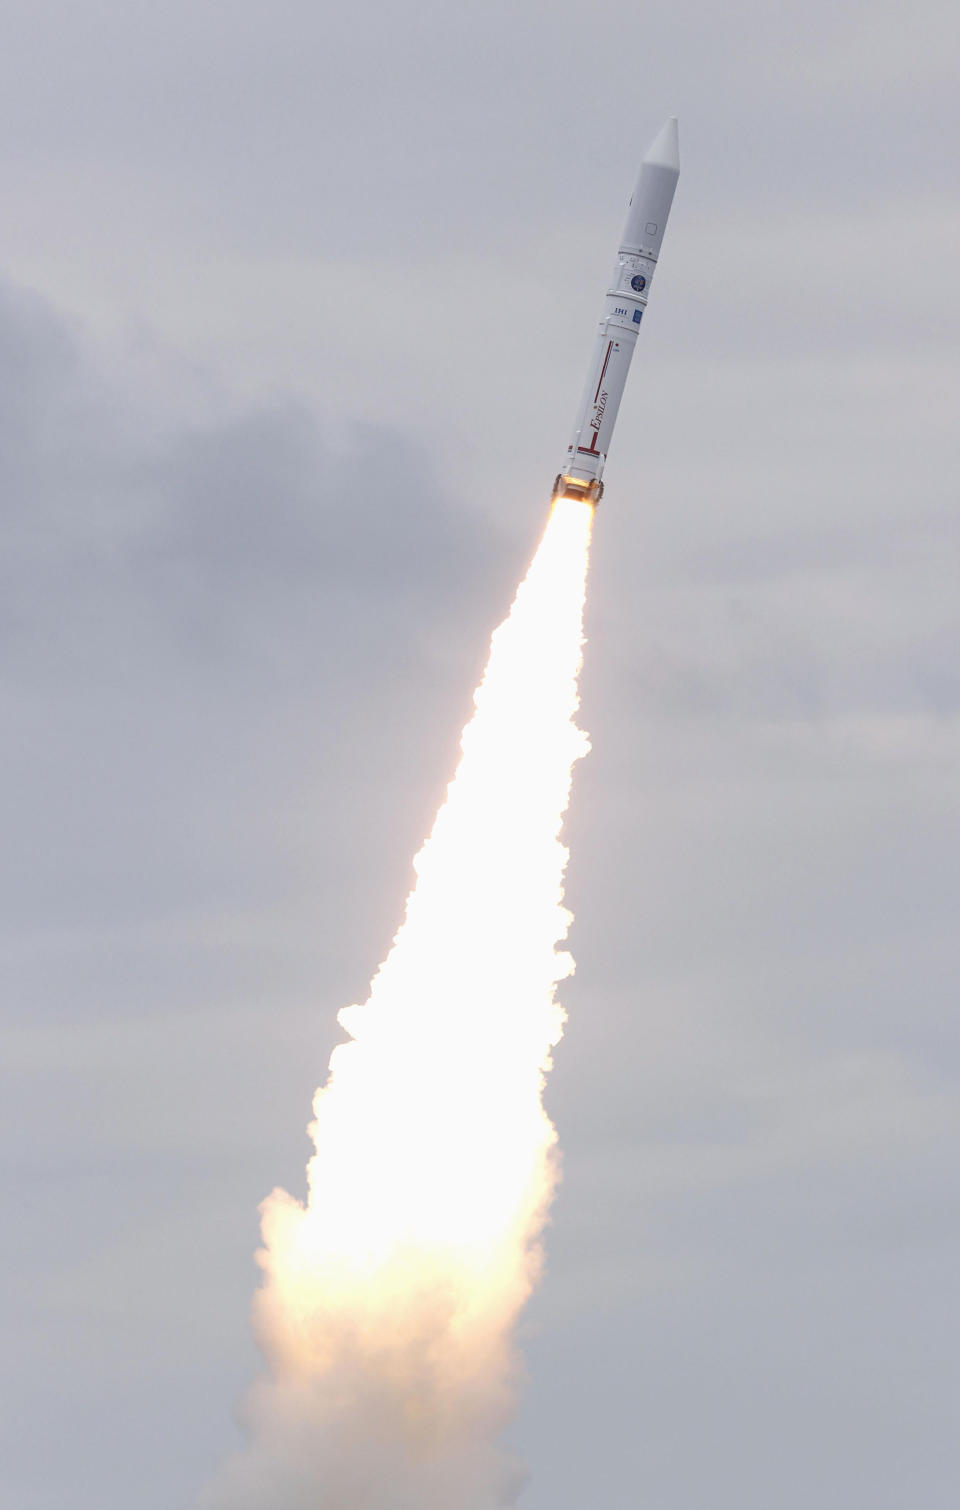 The Epsilon-6 rocket is launched from the Uchinoura Space Center in Kimotsuki town, Kagoshima prefecture, southern Japan Wednesday, Oct. 12, 2022. The Japanese space agency said its rocket failed just after liftoff Wednesday and had to be aborted by a self-destruction command, in the country’s first failed rocket launch in nearly 20 years. (Kyodo News via AP)